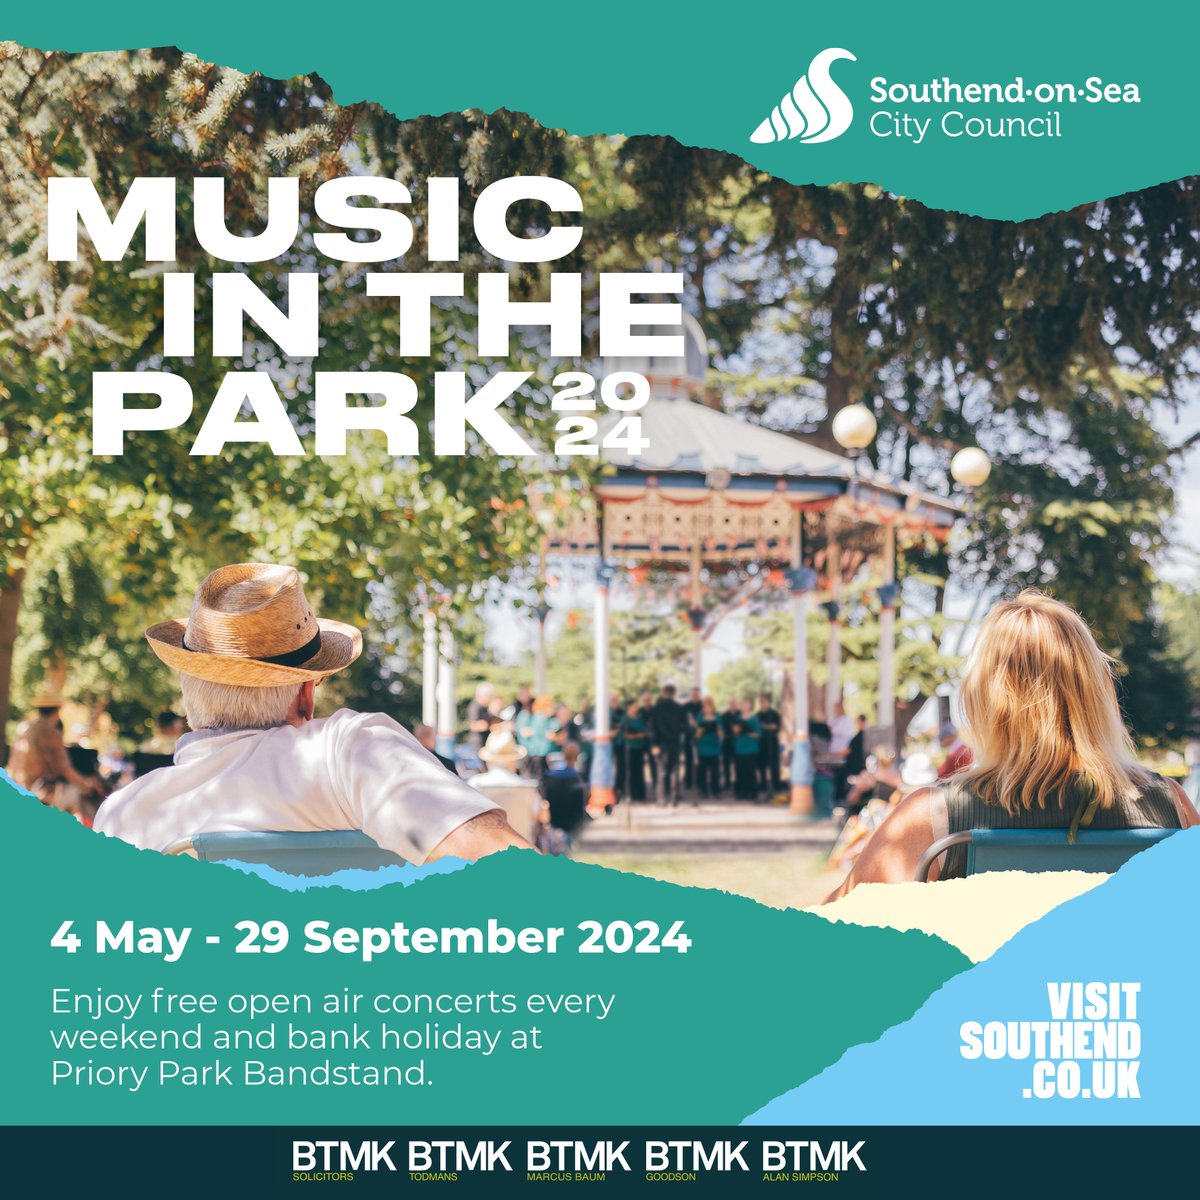 🎉 GREAT NEWS 🎉 The fantastic Music in the Park returns to Priory Park Bandstand next month! Over 40 different bands & performers will play every weekend and bank holiday starting from May! 📅 4 May - 29 Sept ⏳ 3pm - 4:40pm 📌 Priory Park Bandstand 👉 visitsouthend.co.uk/music-in-the-p…